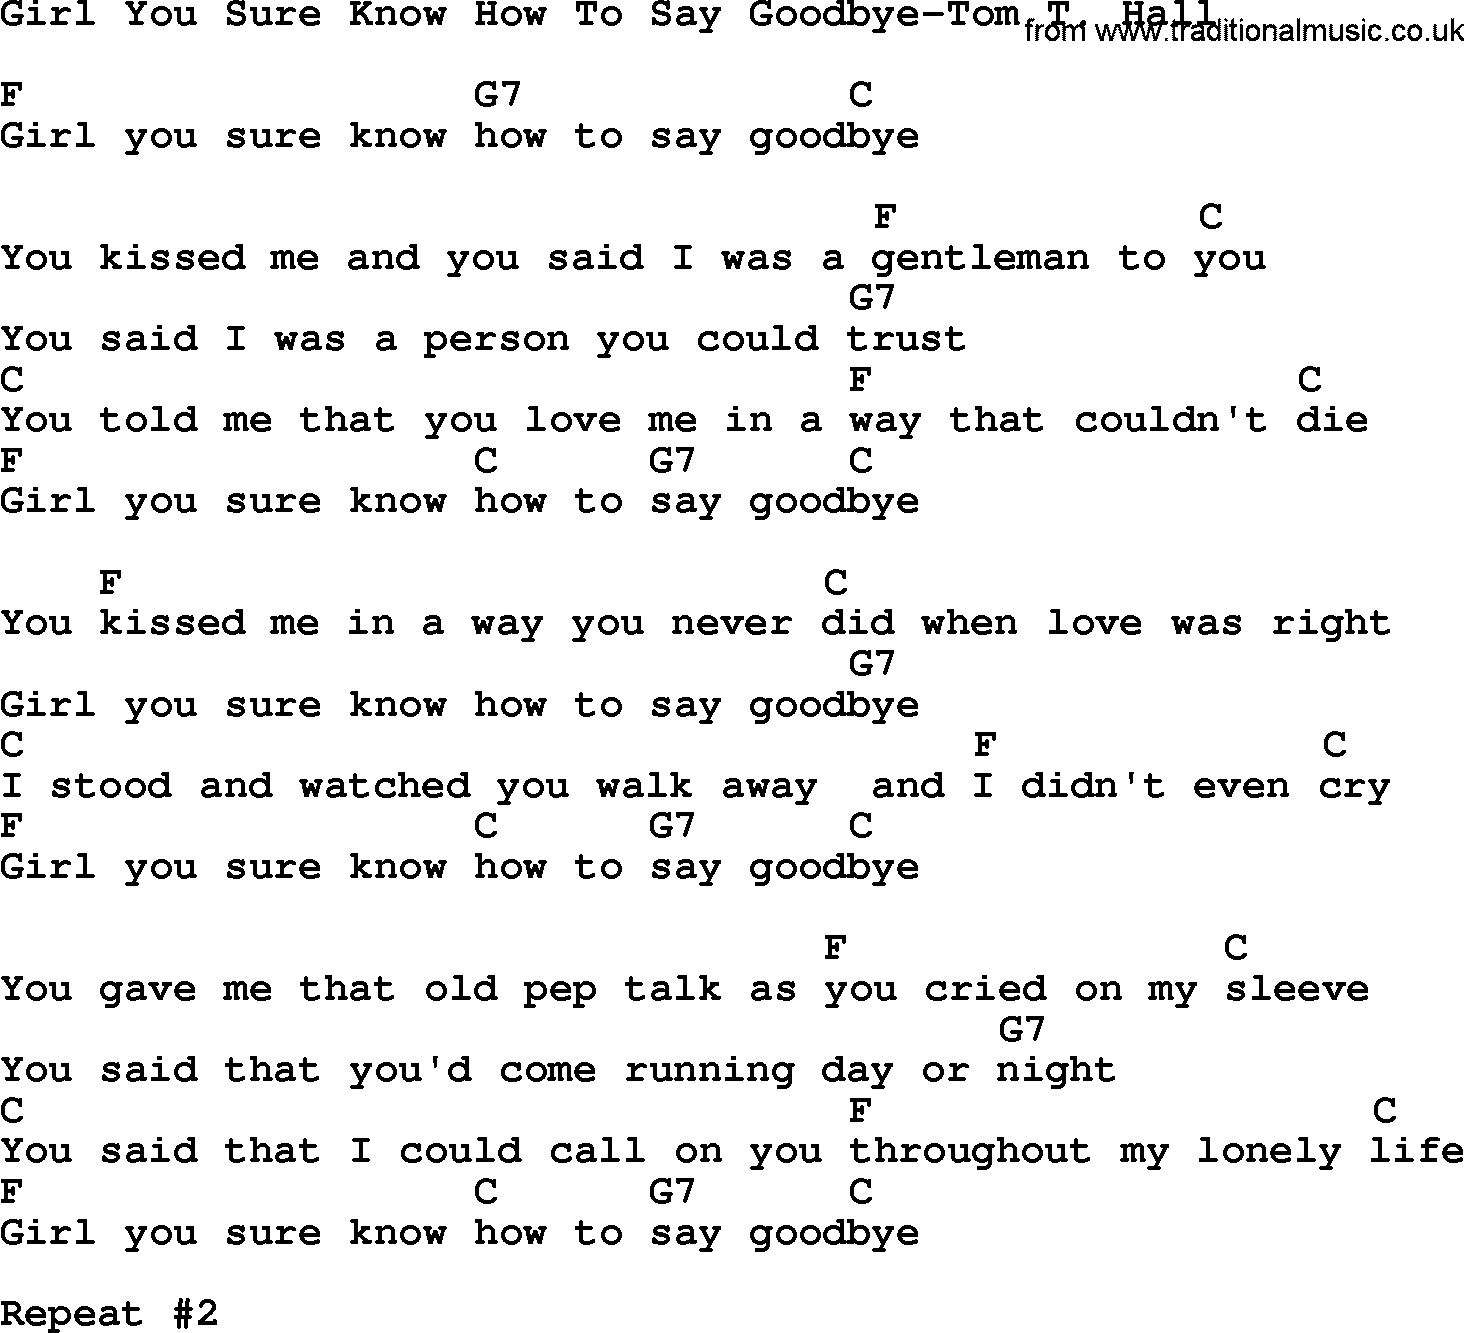 Country music song: Girl You Sure Know How To Say Goodbye-Tom T Hall lyrics and chords